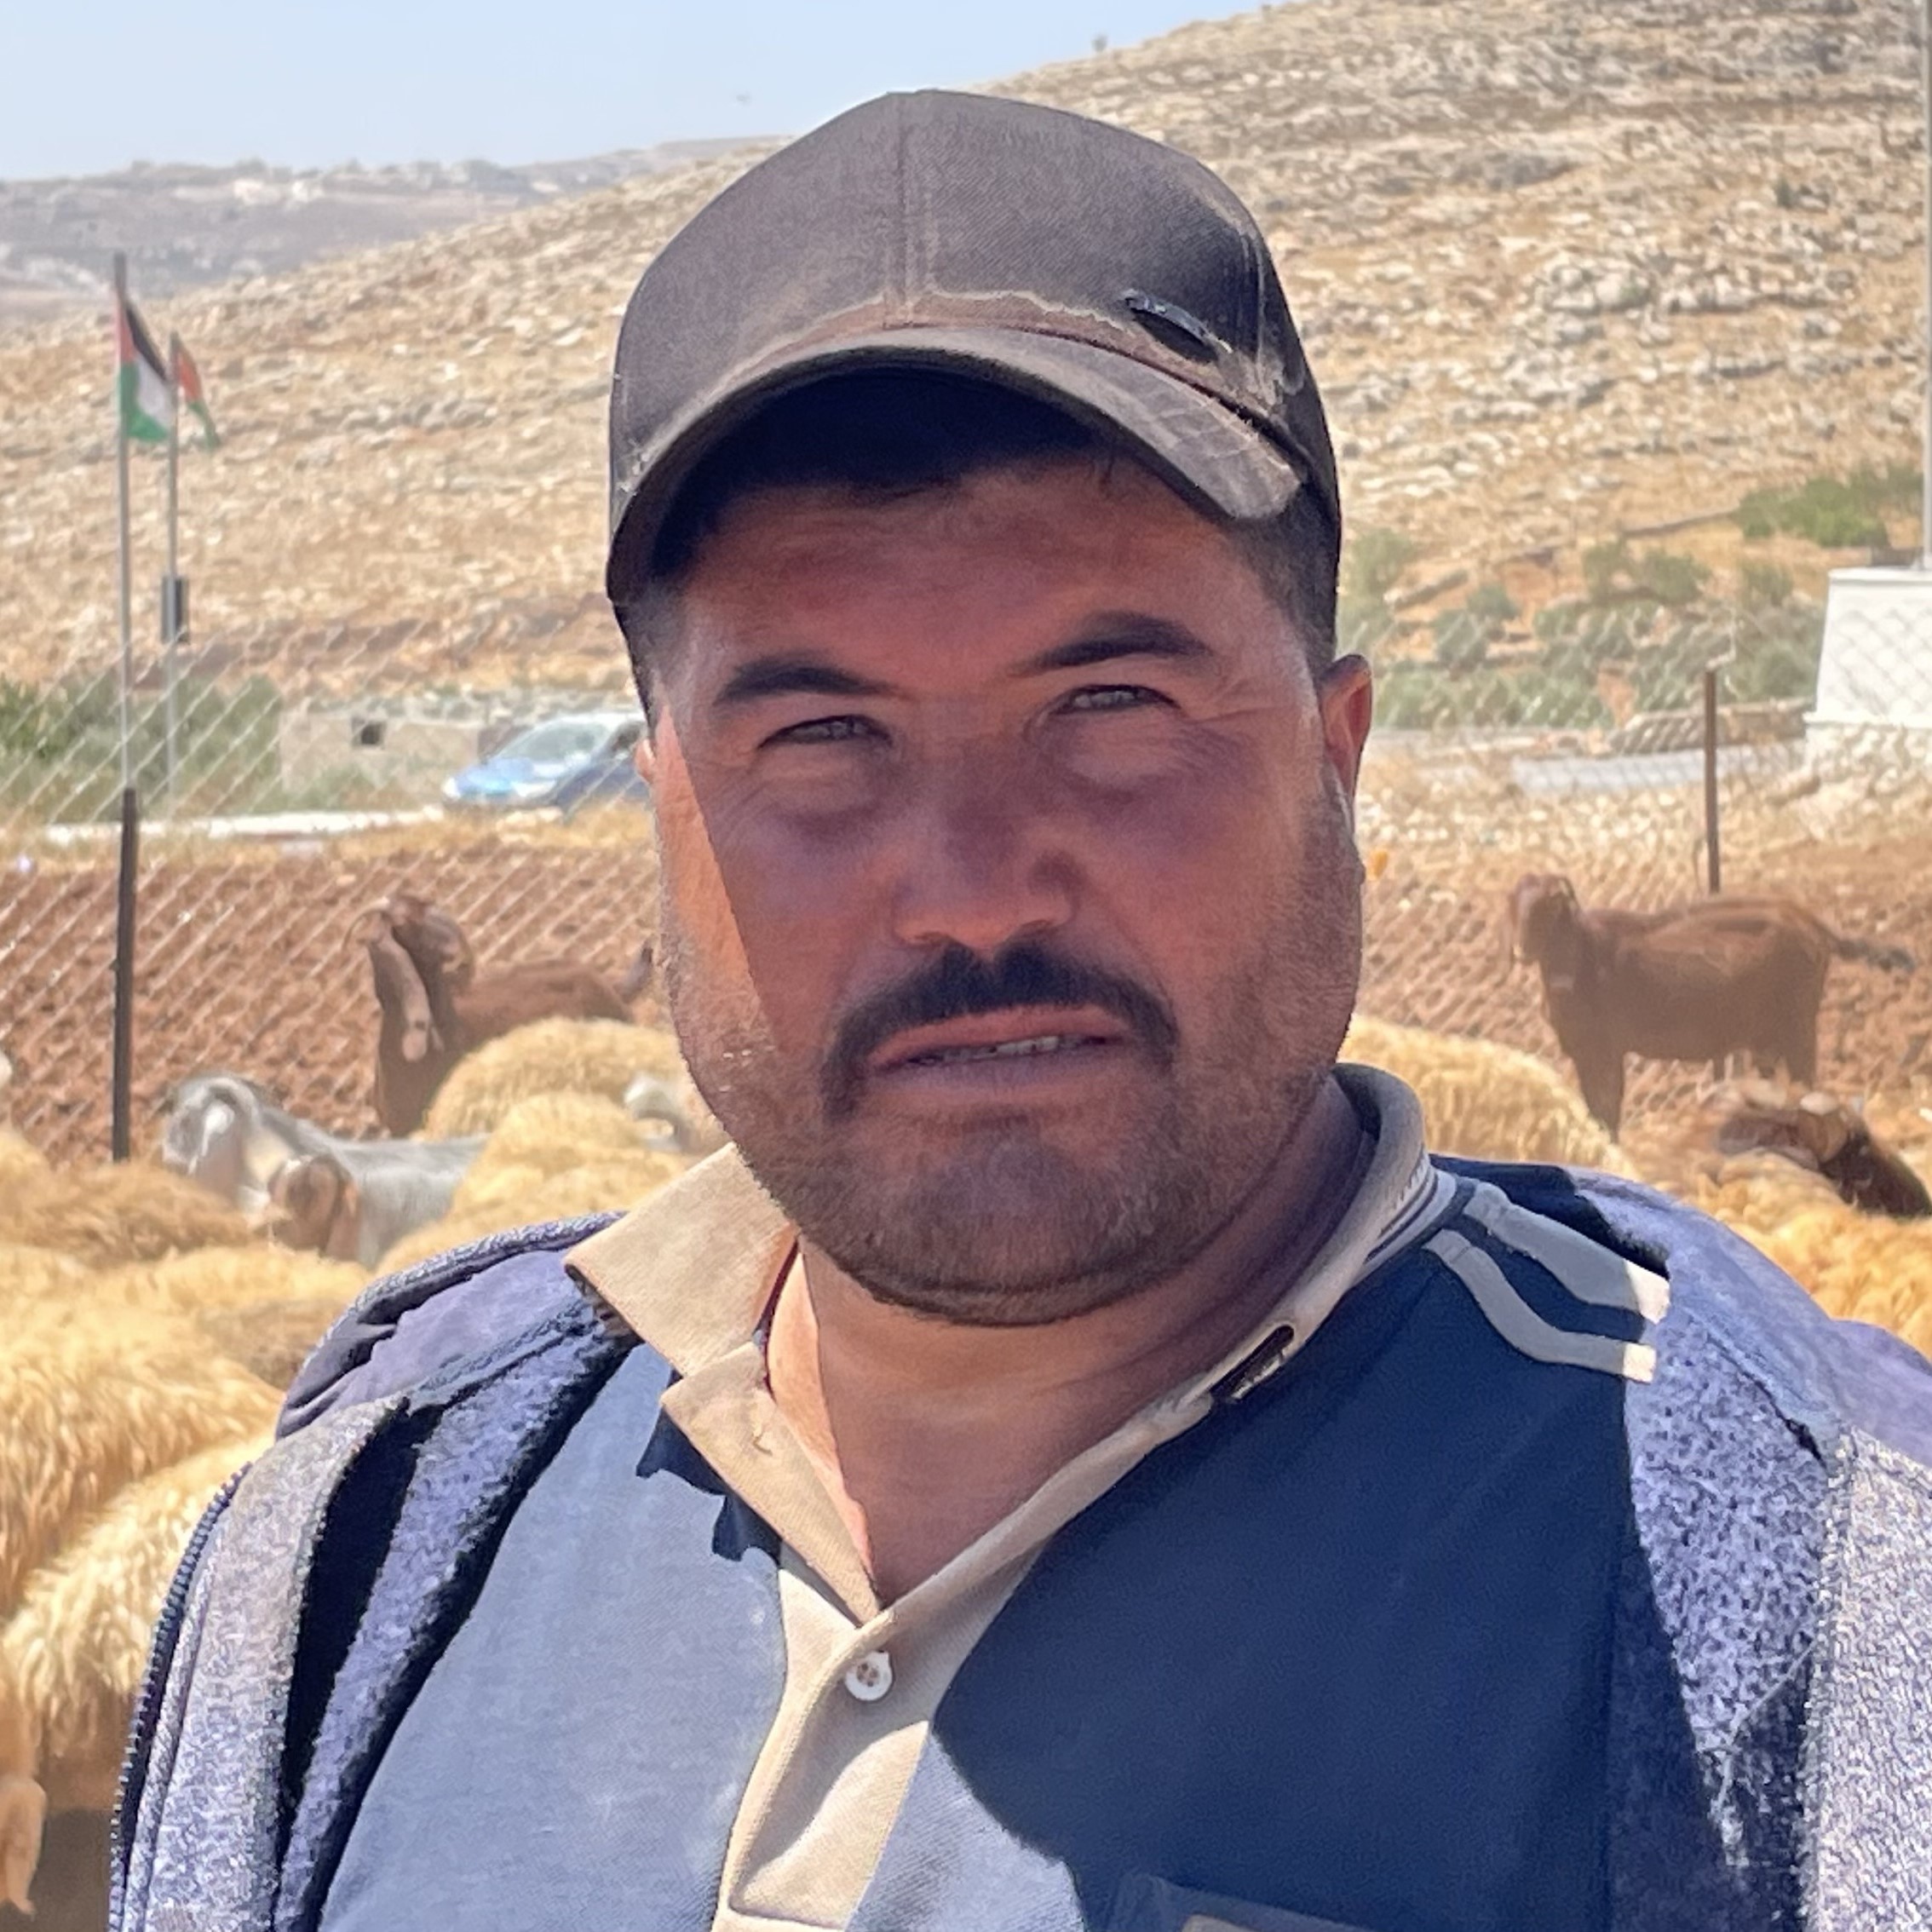 Ammar Abu ‘Alia, resident of Ras al Tin who left with his family in recent days. This photo was taken where he is currently staying with relatives, guarding his herd. Photo by OCHA, 9 August 2023